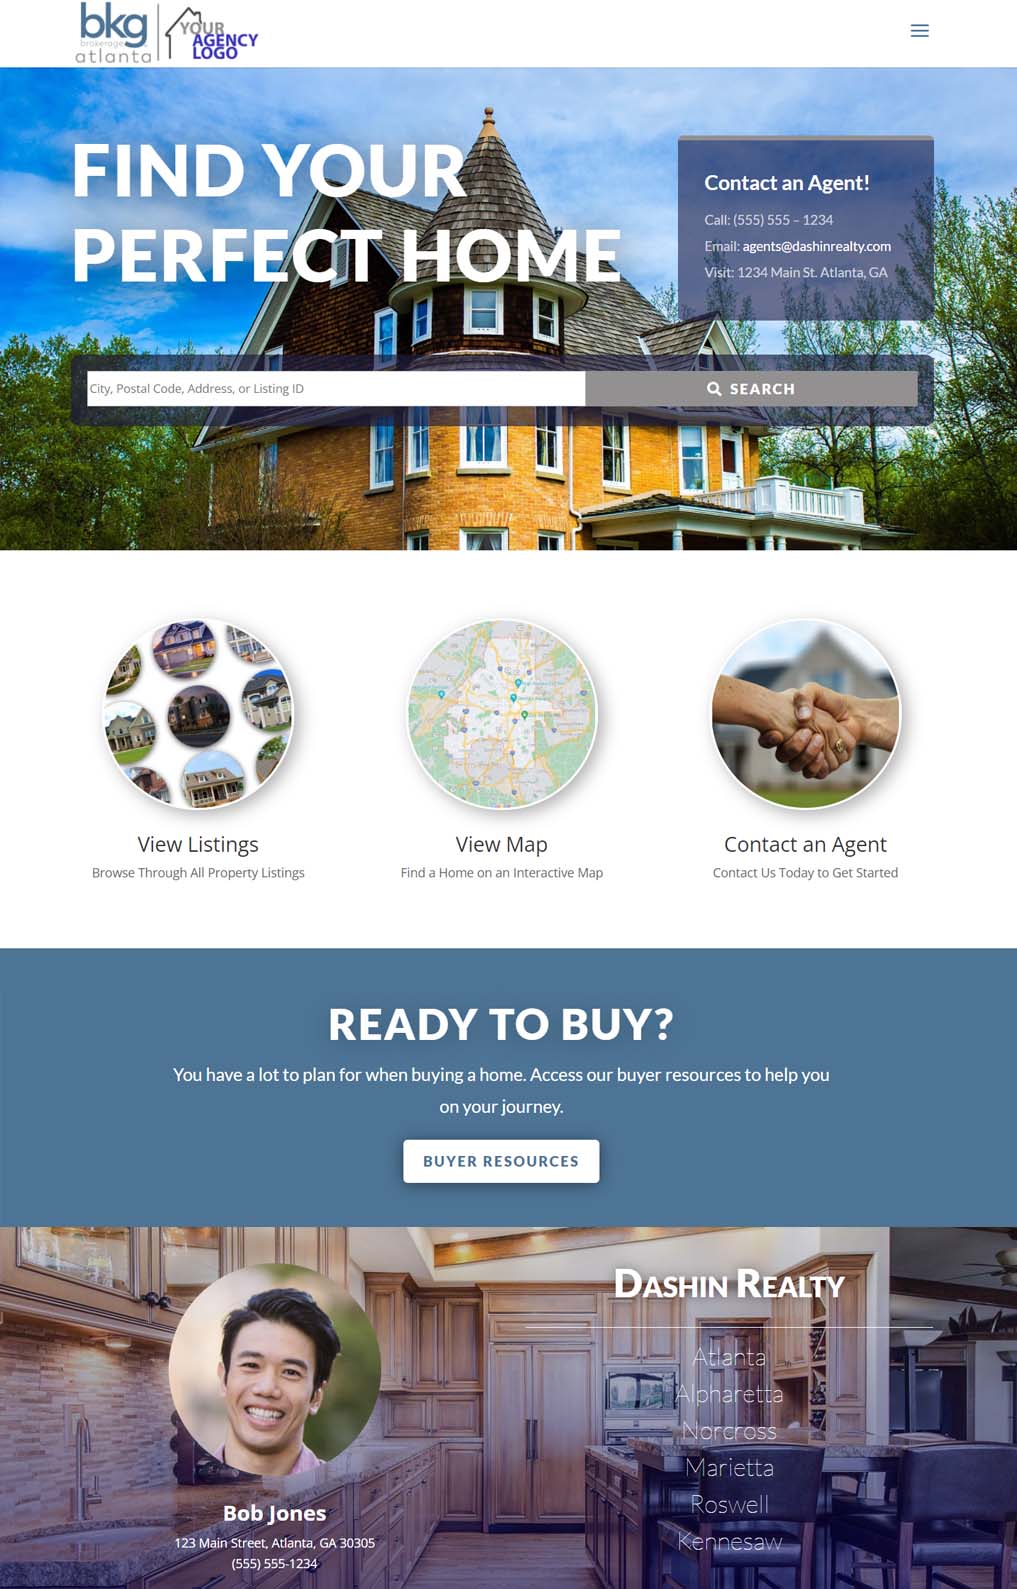 Real Estate Website with IDX Broker by SpinnerMedia